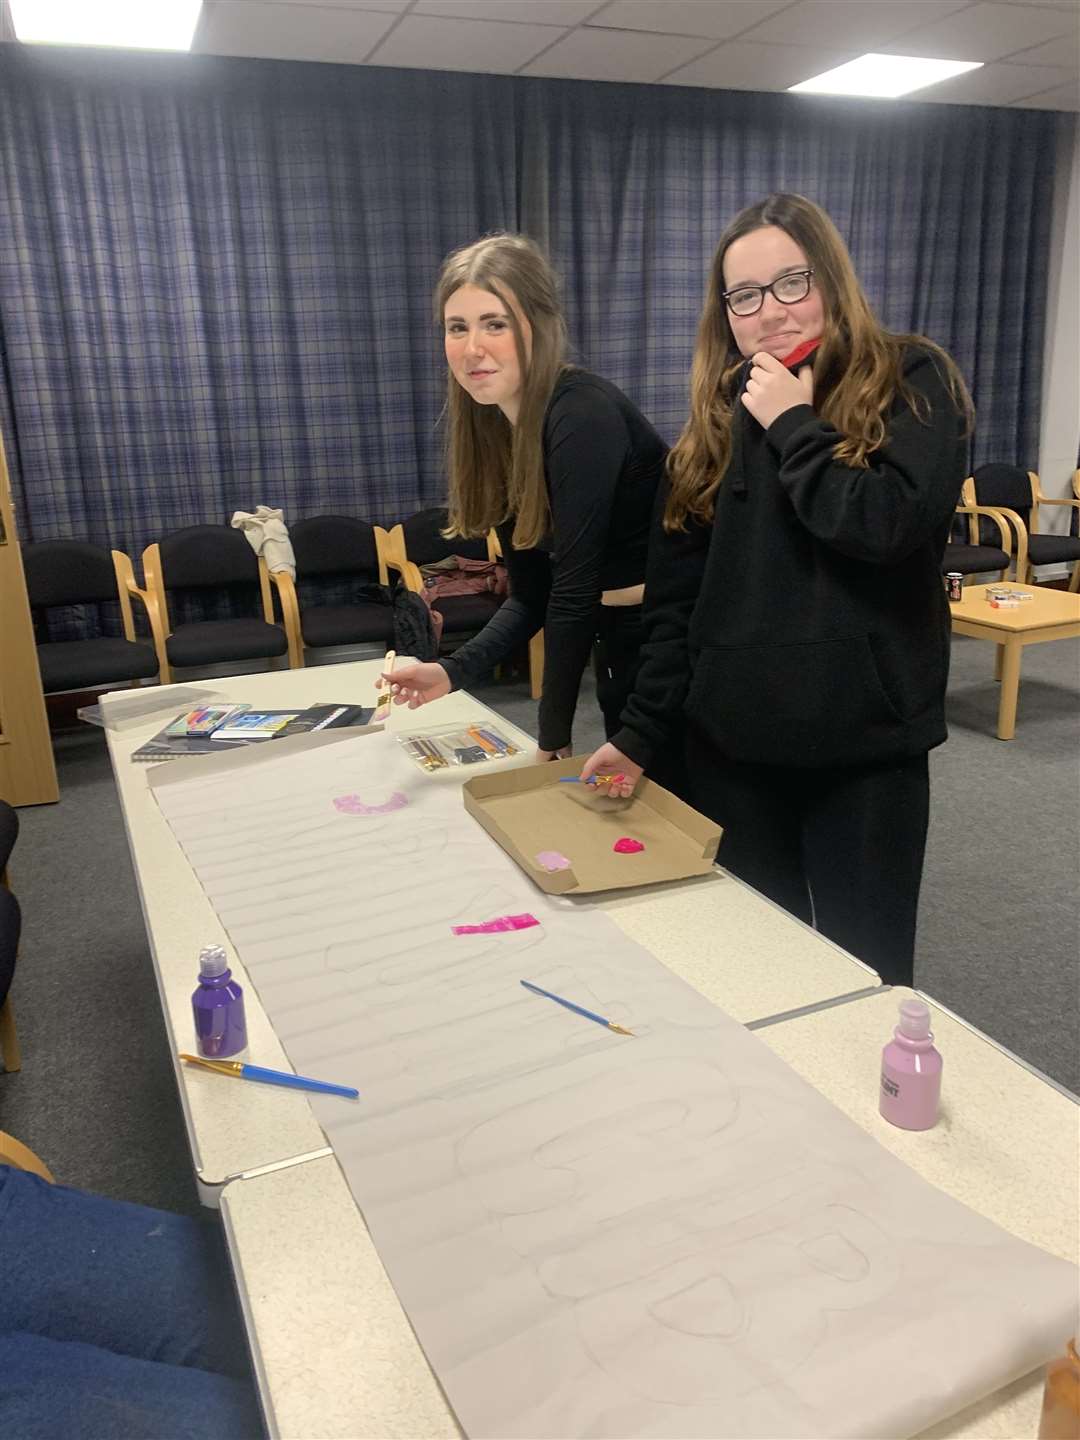 Rebecca Prowse and Grace Dent begin painting a banner for the youth club.